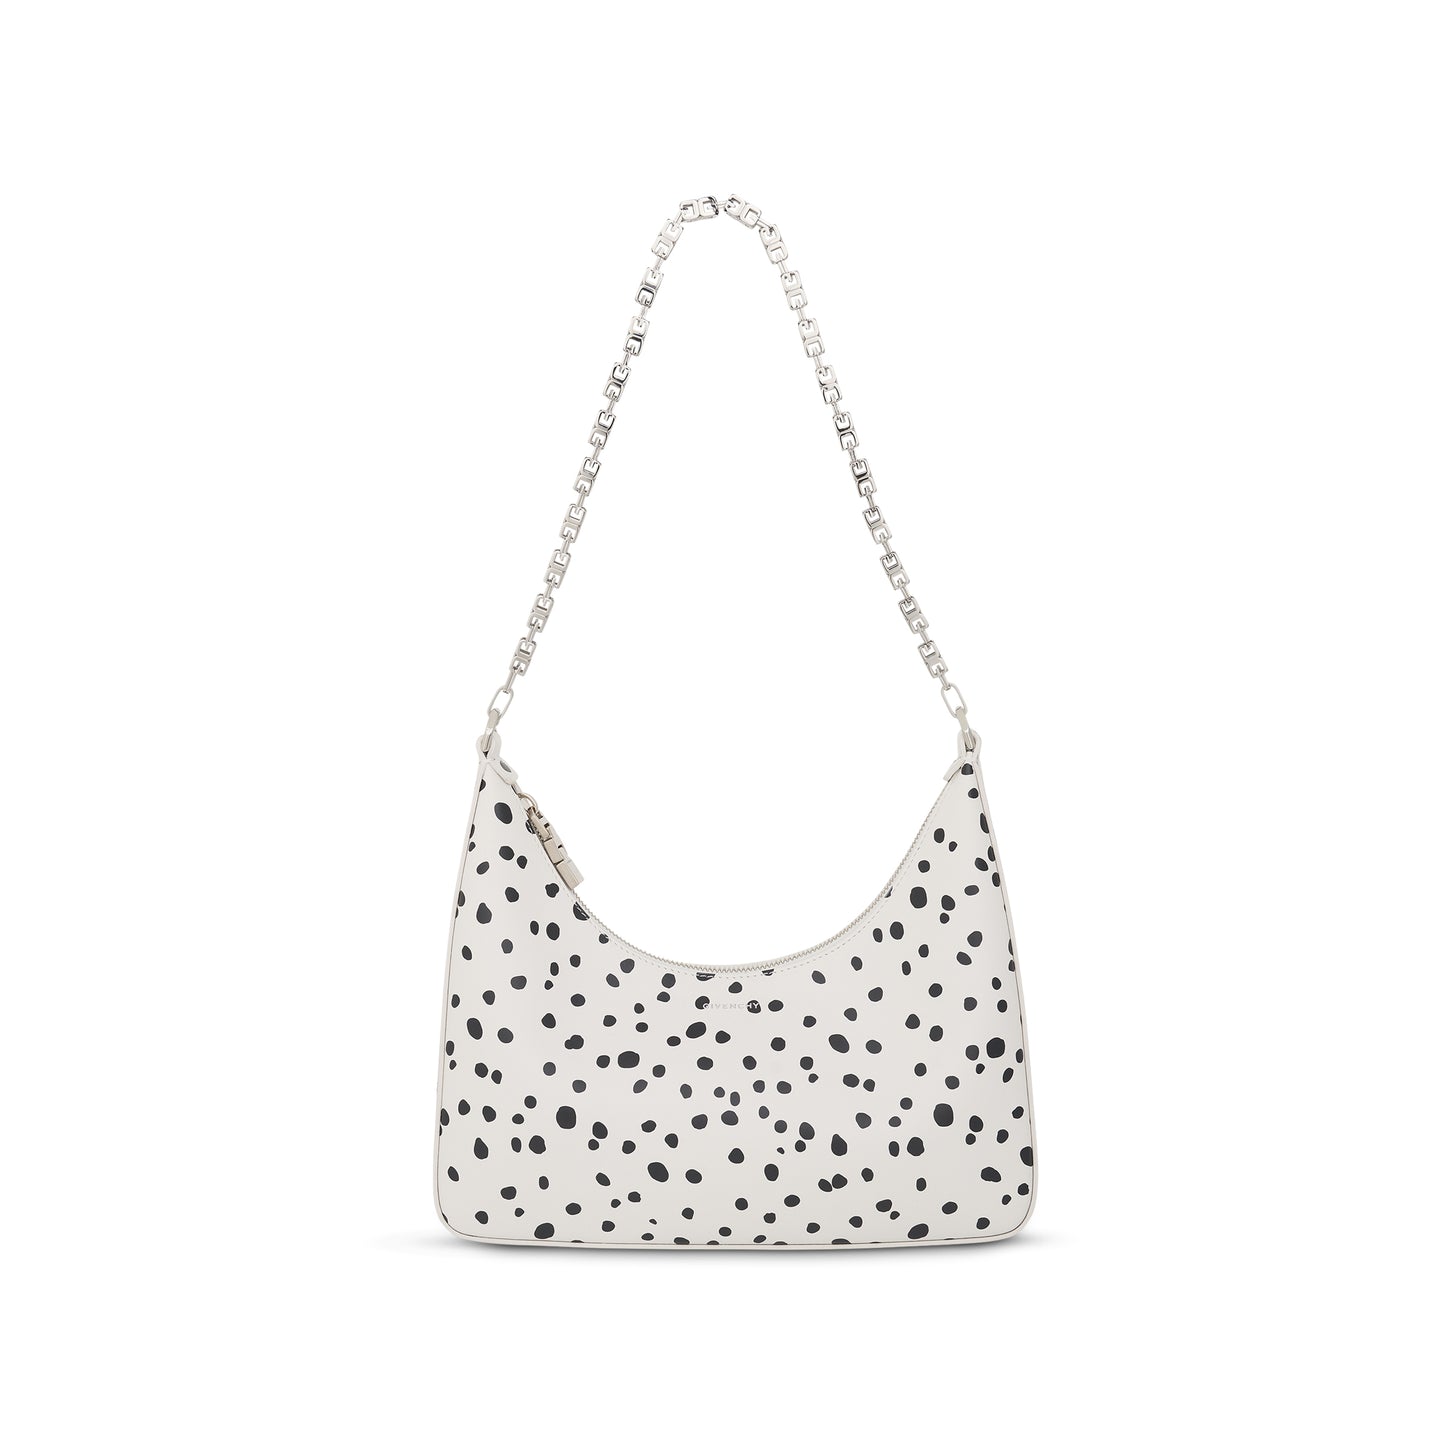 Small Moon Cut Out Bag with Dalmatian Dots in White/Black